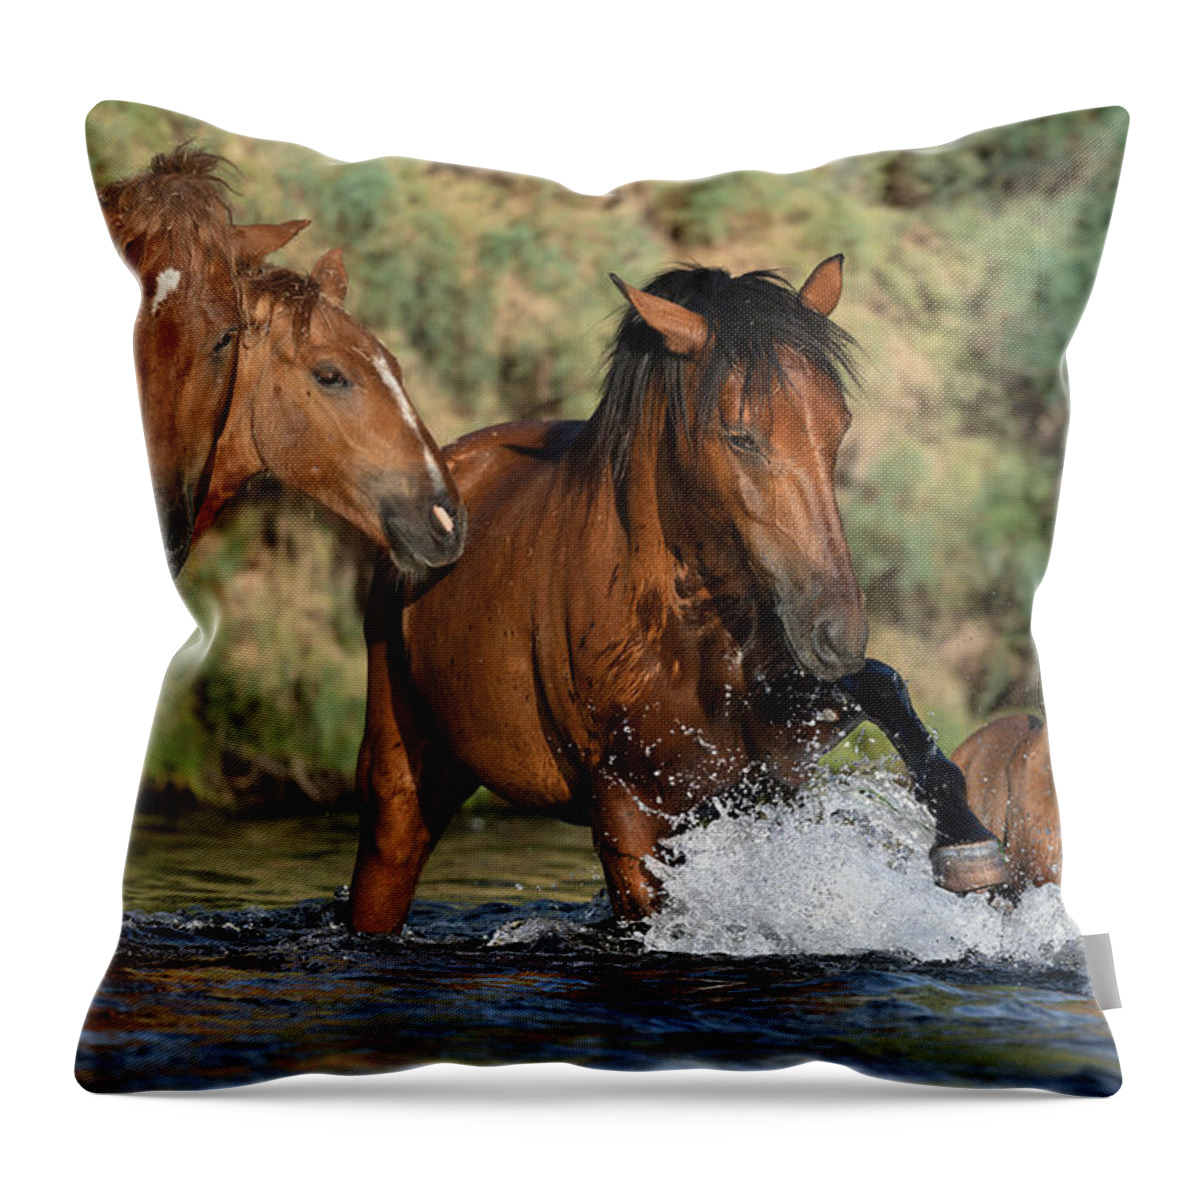 Stallion Throw Pillow featuring the photograph Soldier On. by Paul Martin